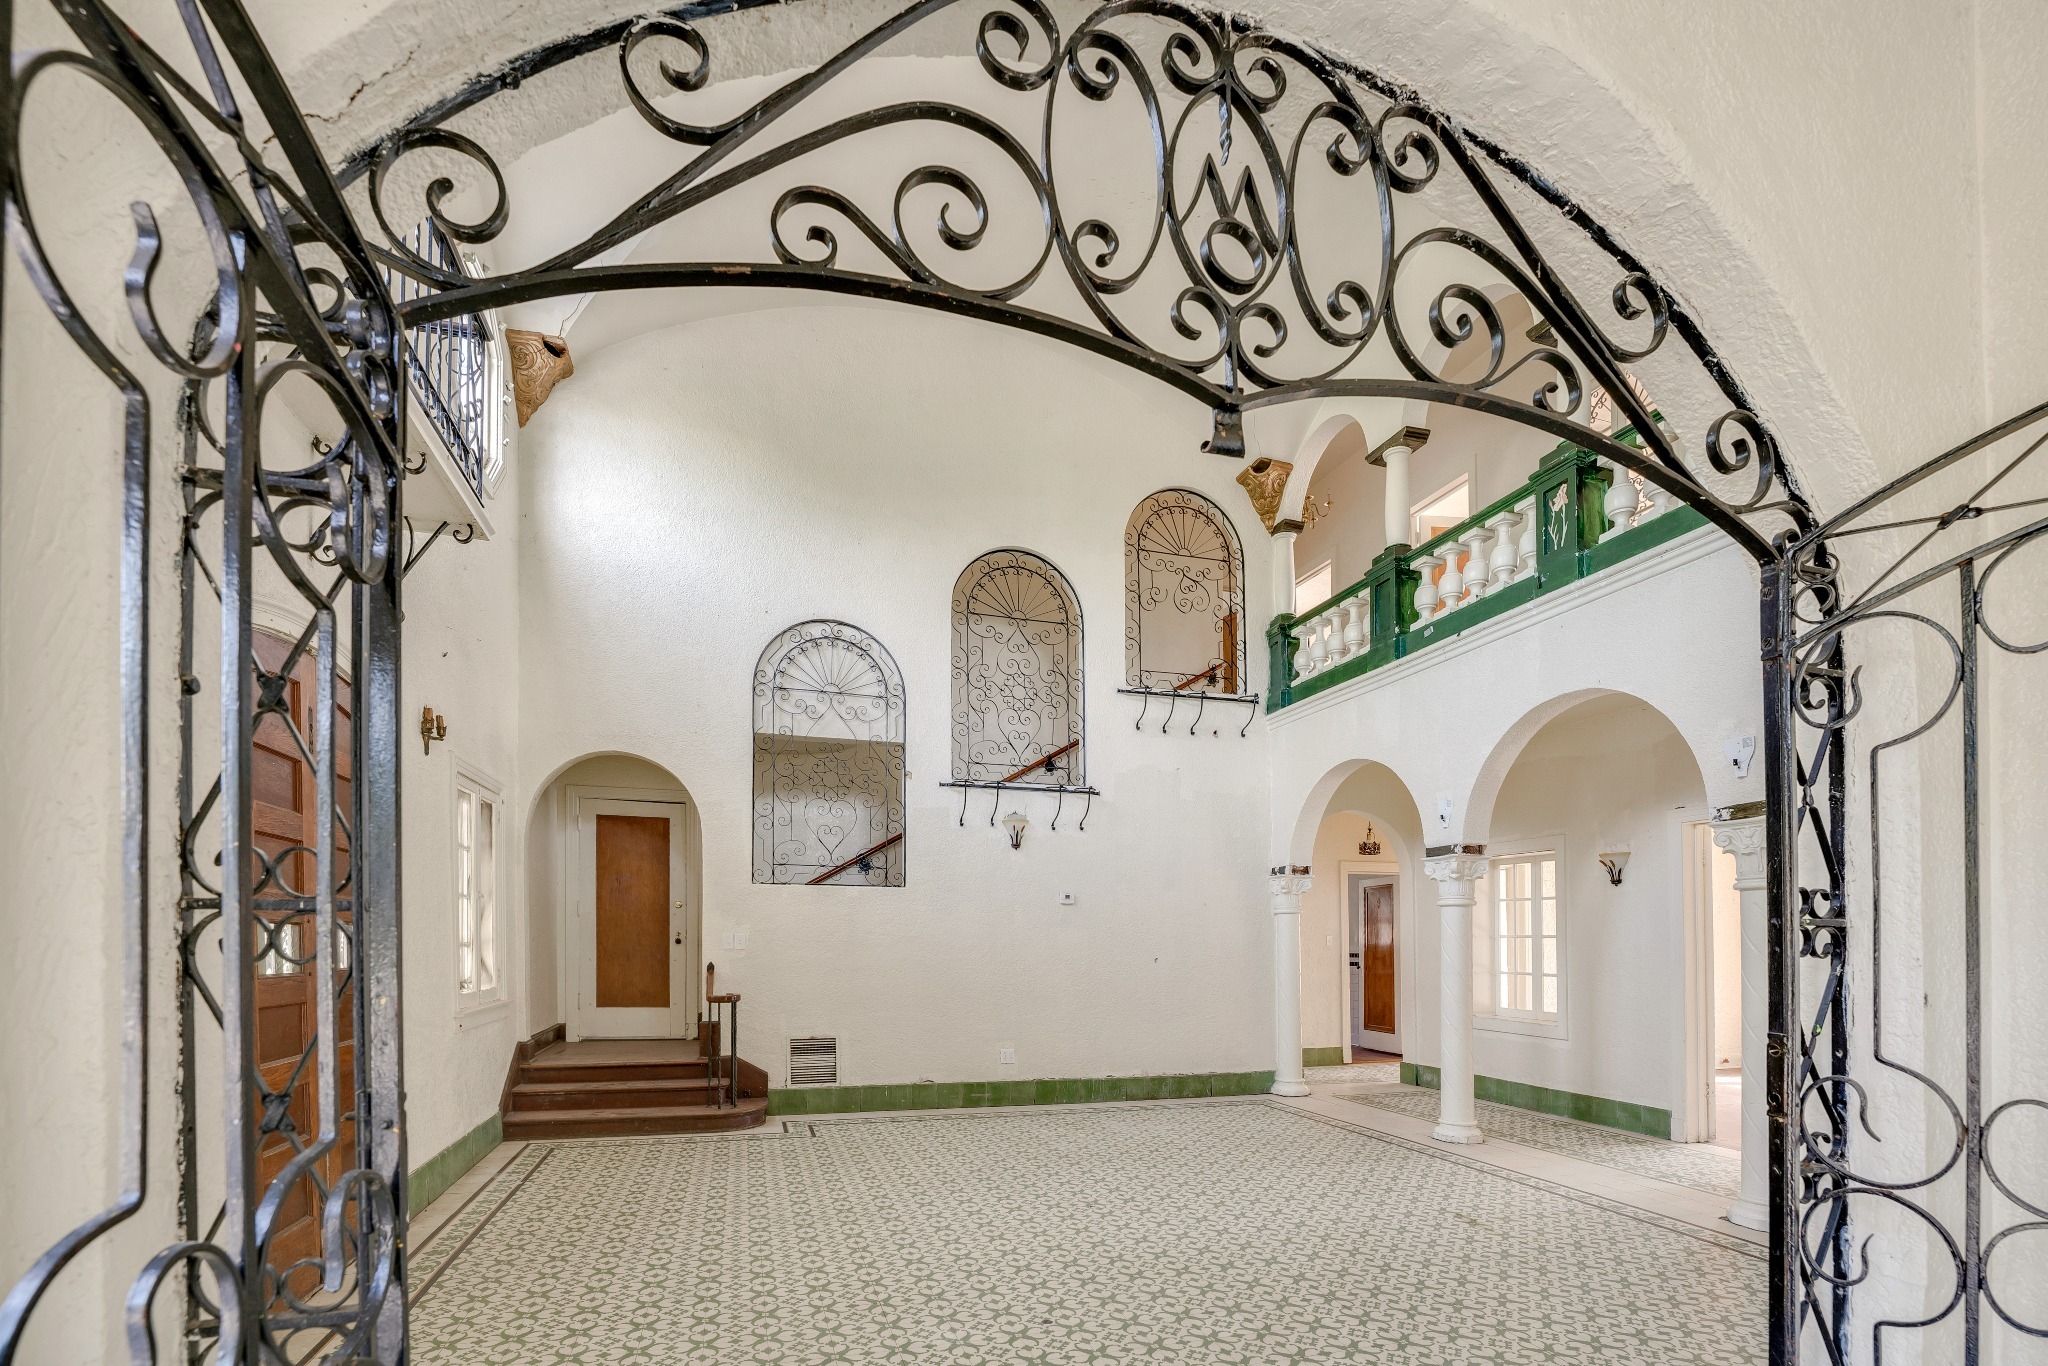 An iron-looking archway in a home with tall ceilings.